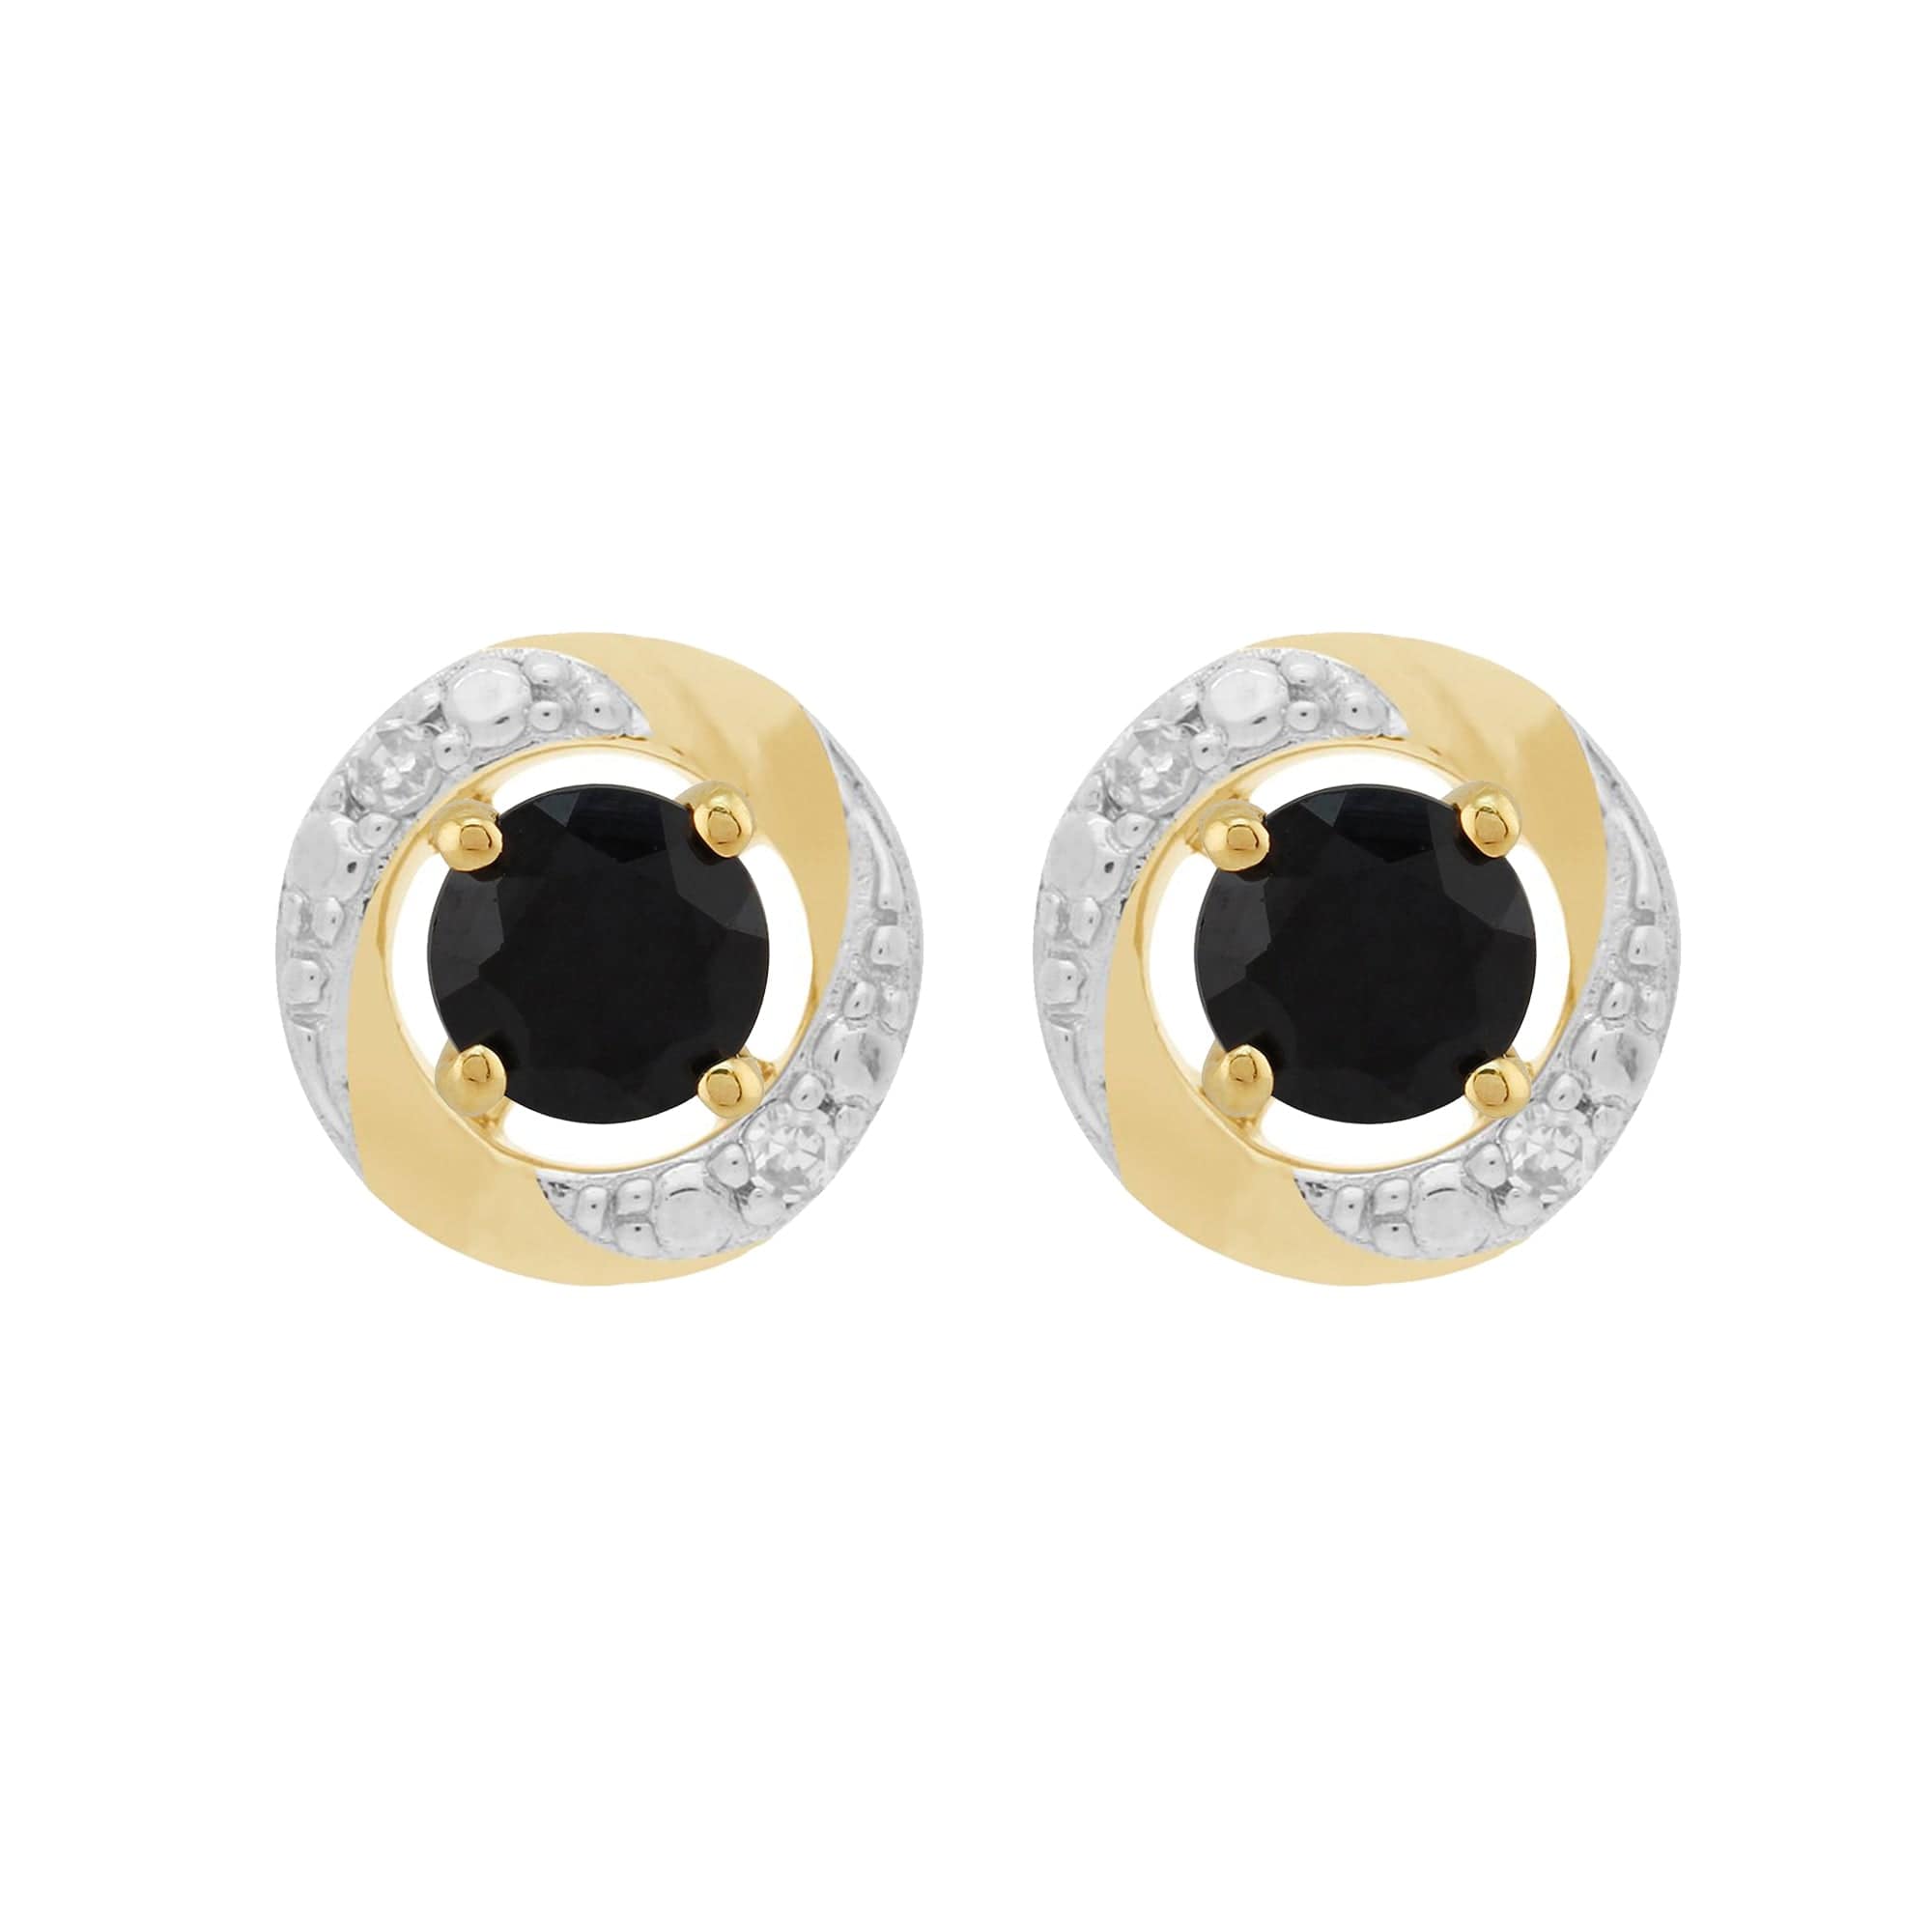 11559-191E0374019 Classic Round Dark Blue Sapphire Studs with Detachable Diamond Halo Ear Jacket in 9ct Yellow Gold 1